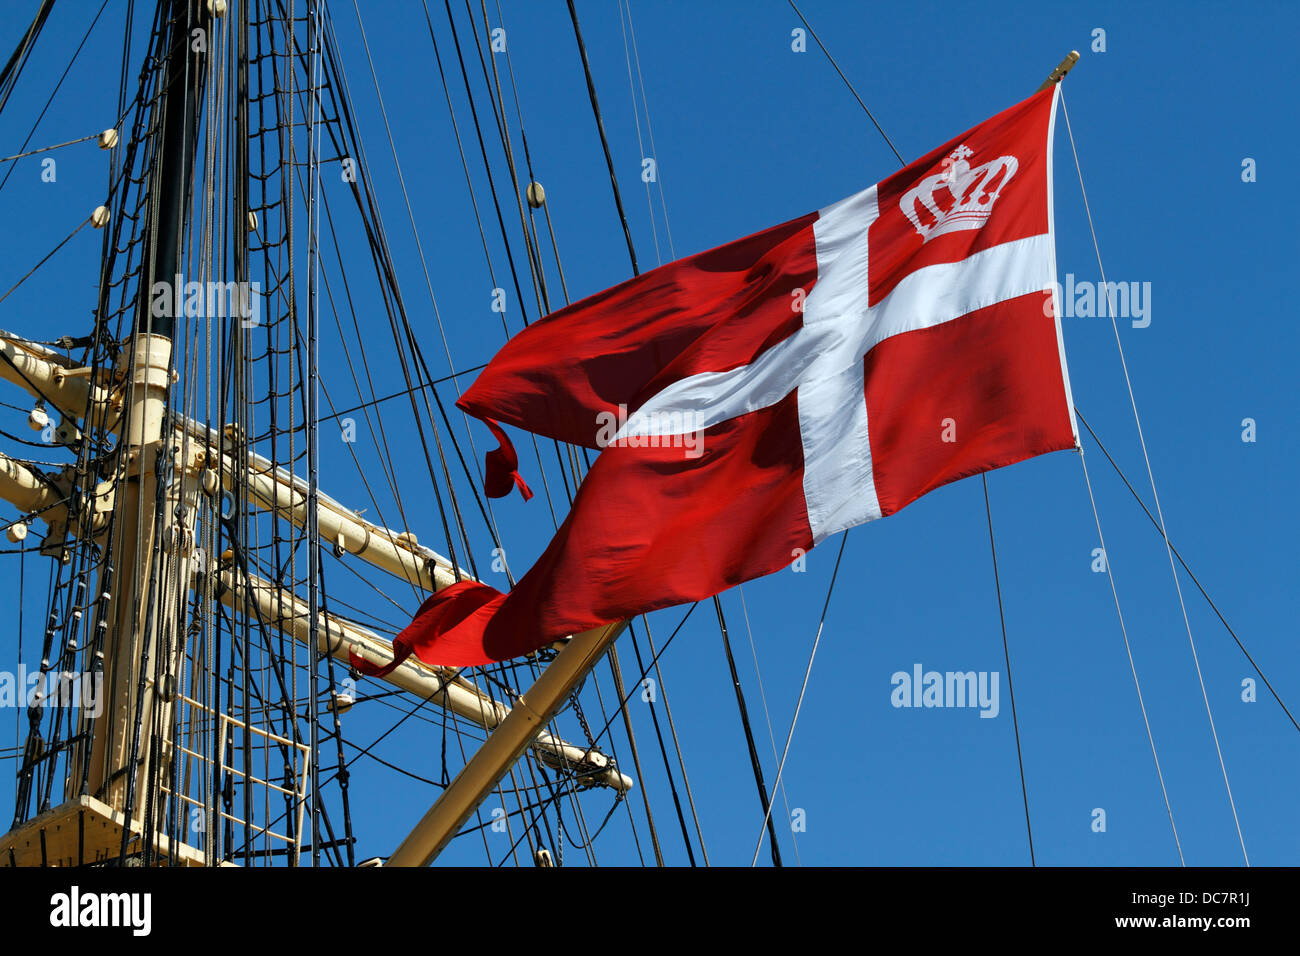 The official swallow-tailed Danish flag, the Dannebrog, on old tall ship, the Danish training ship DANMARK moored in Copenhagen Stock Photo